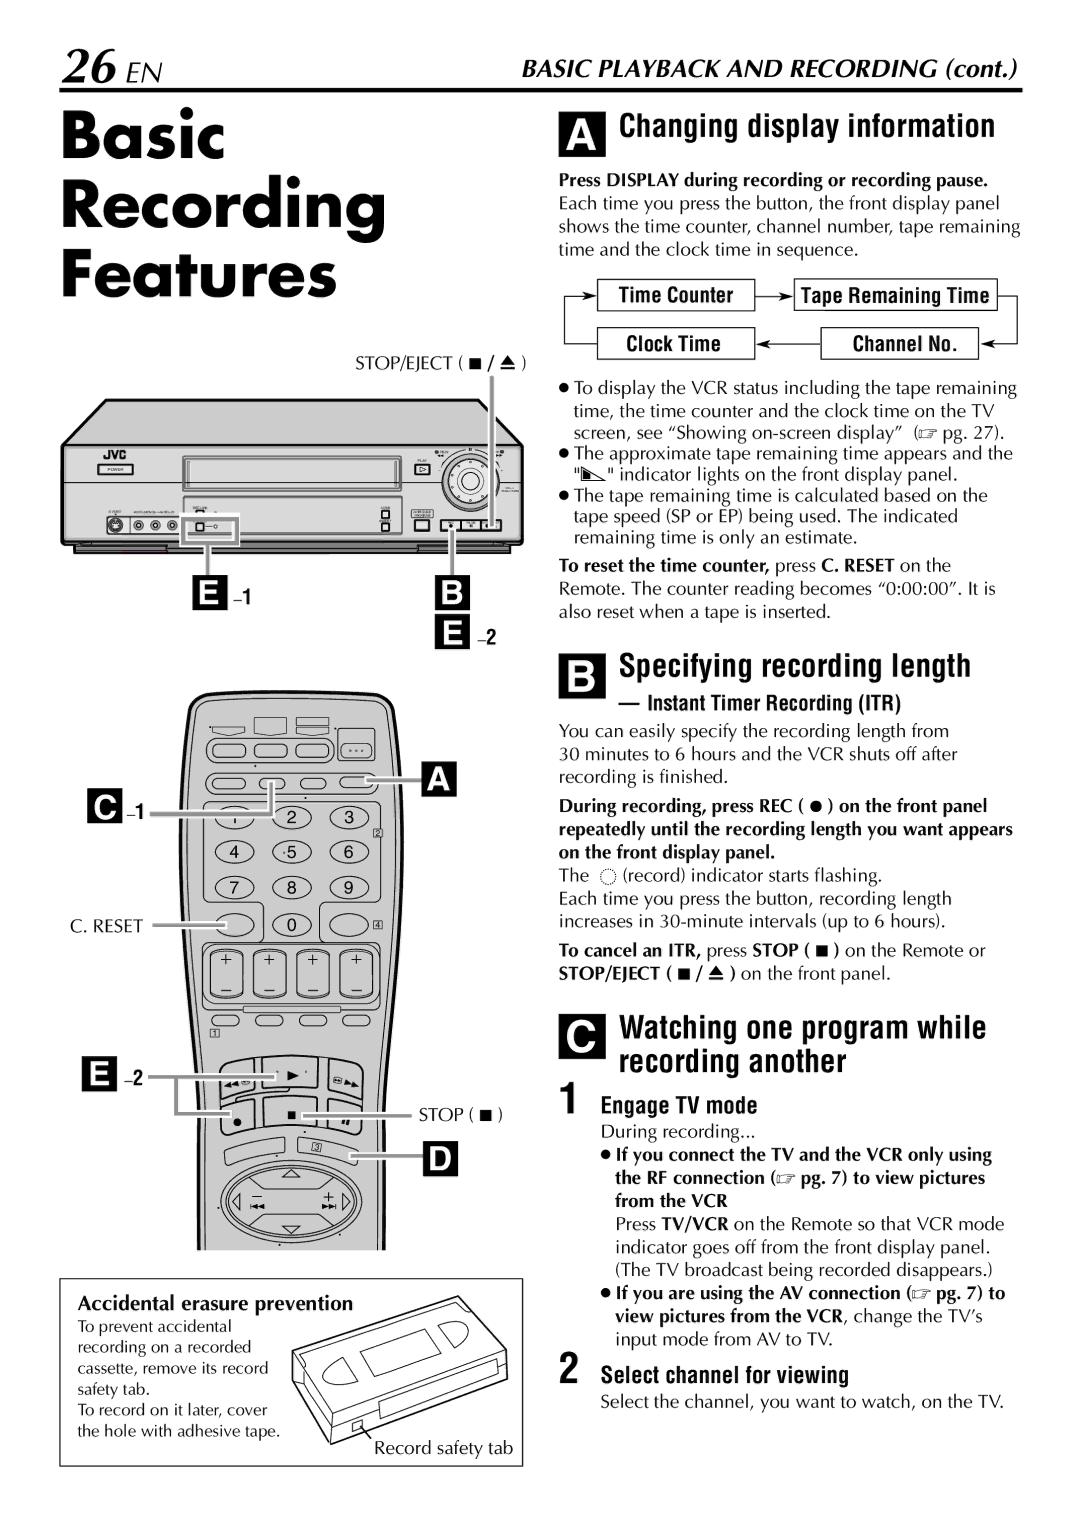 JVC HR-S5900U Basic Recording Features, 26 EN, Specifying recording length, Watching one program while, Recording another 